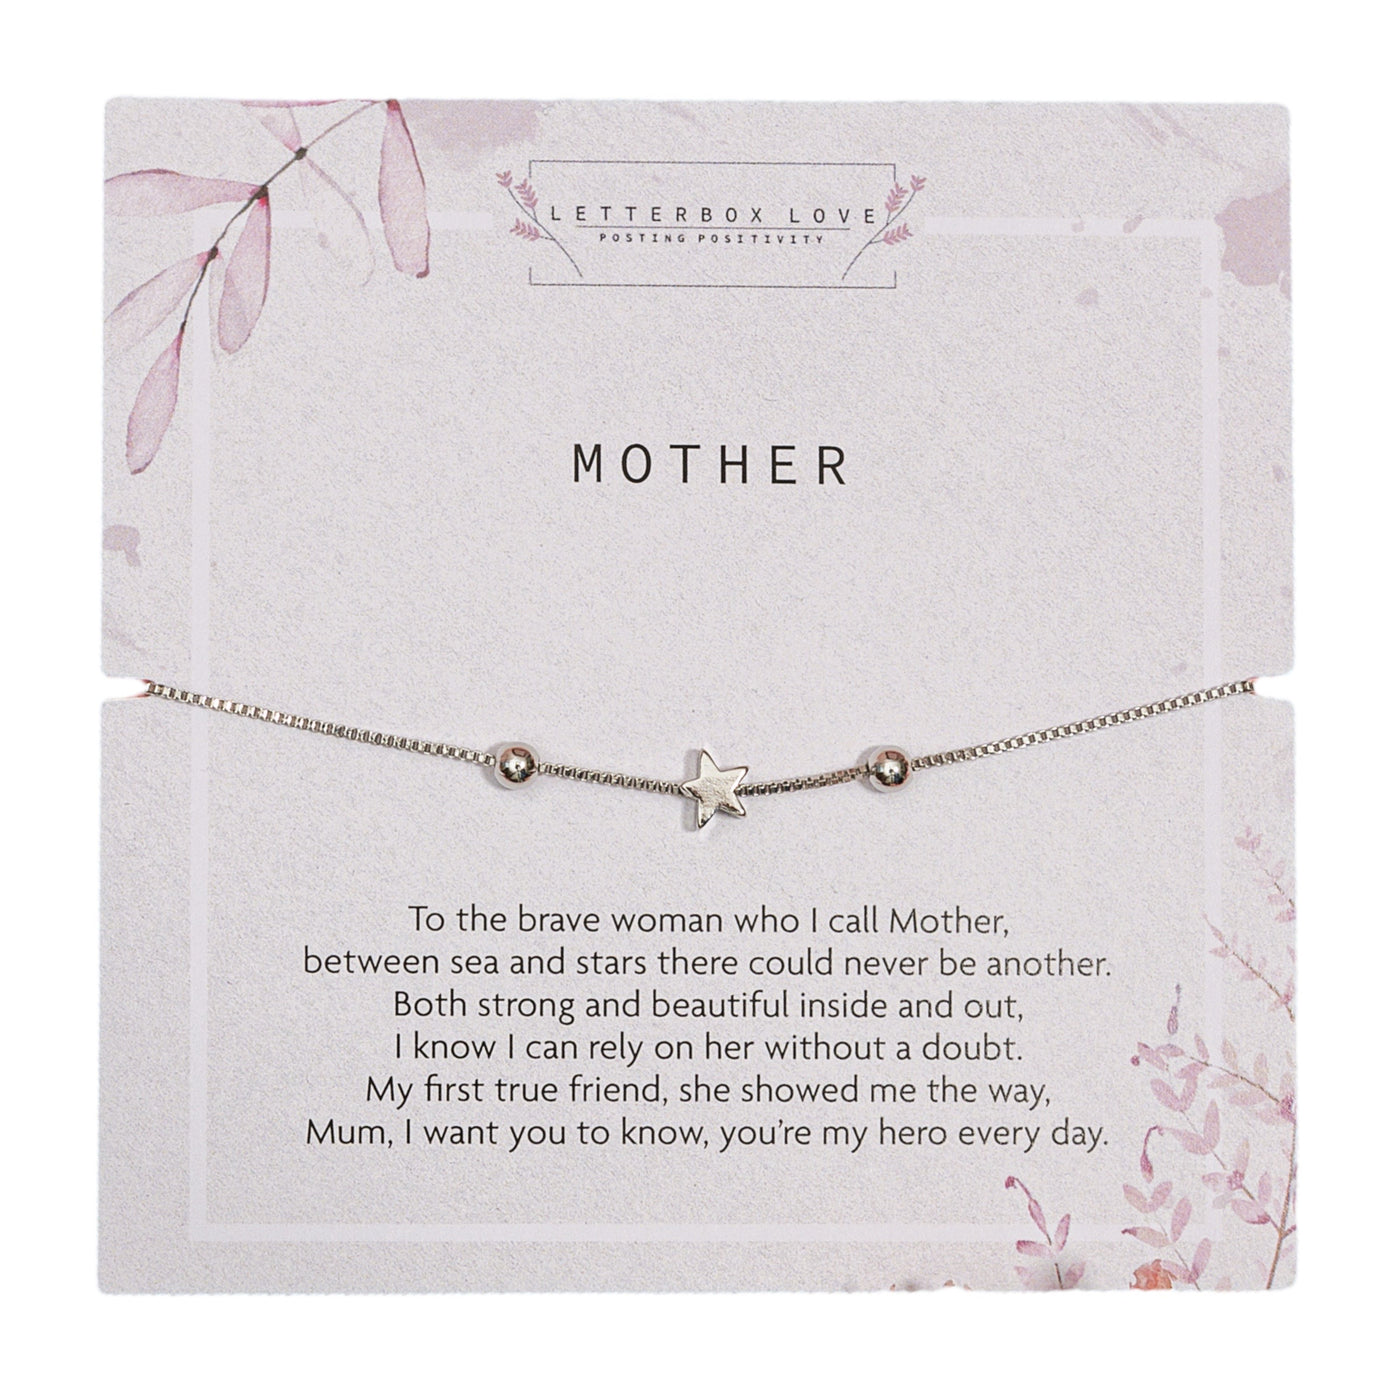 A simple and elegant bracelet with a single silver star charm on a fine chain, designed as a tribute to mothers. It's displayed on a subtle grey card with 'MOTHER' printed at the top, and a touching poem below that celebrates the unwavering strength and beauty of a mother. Delicate pink foliage adorns the corners of the card, adding a soft, feminine touch.